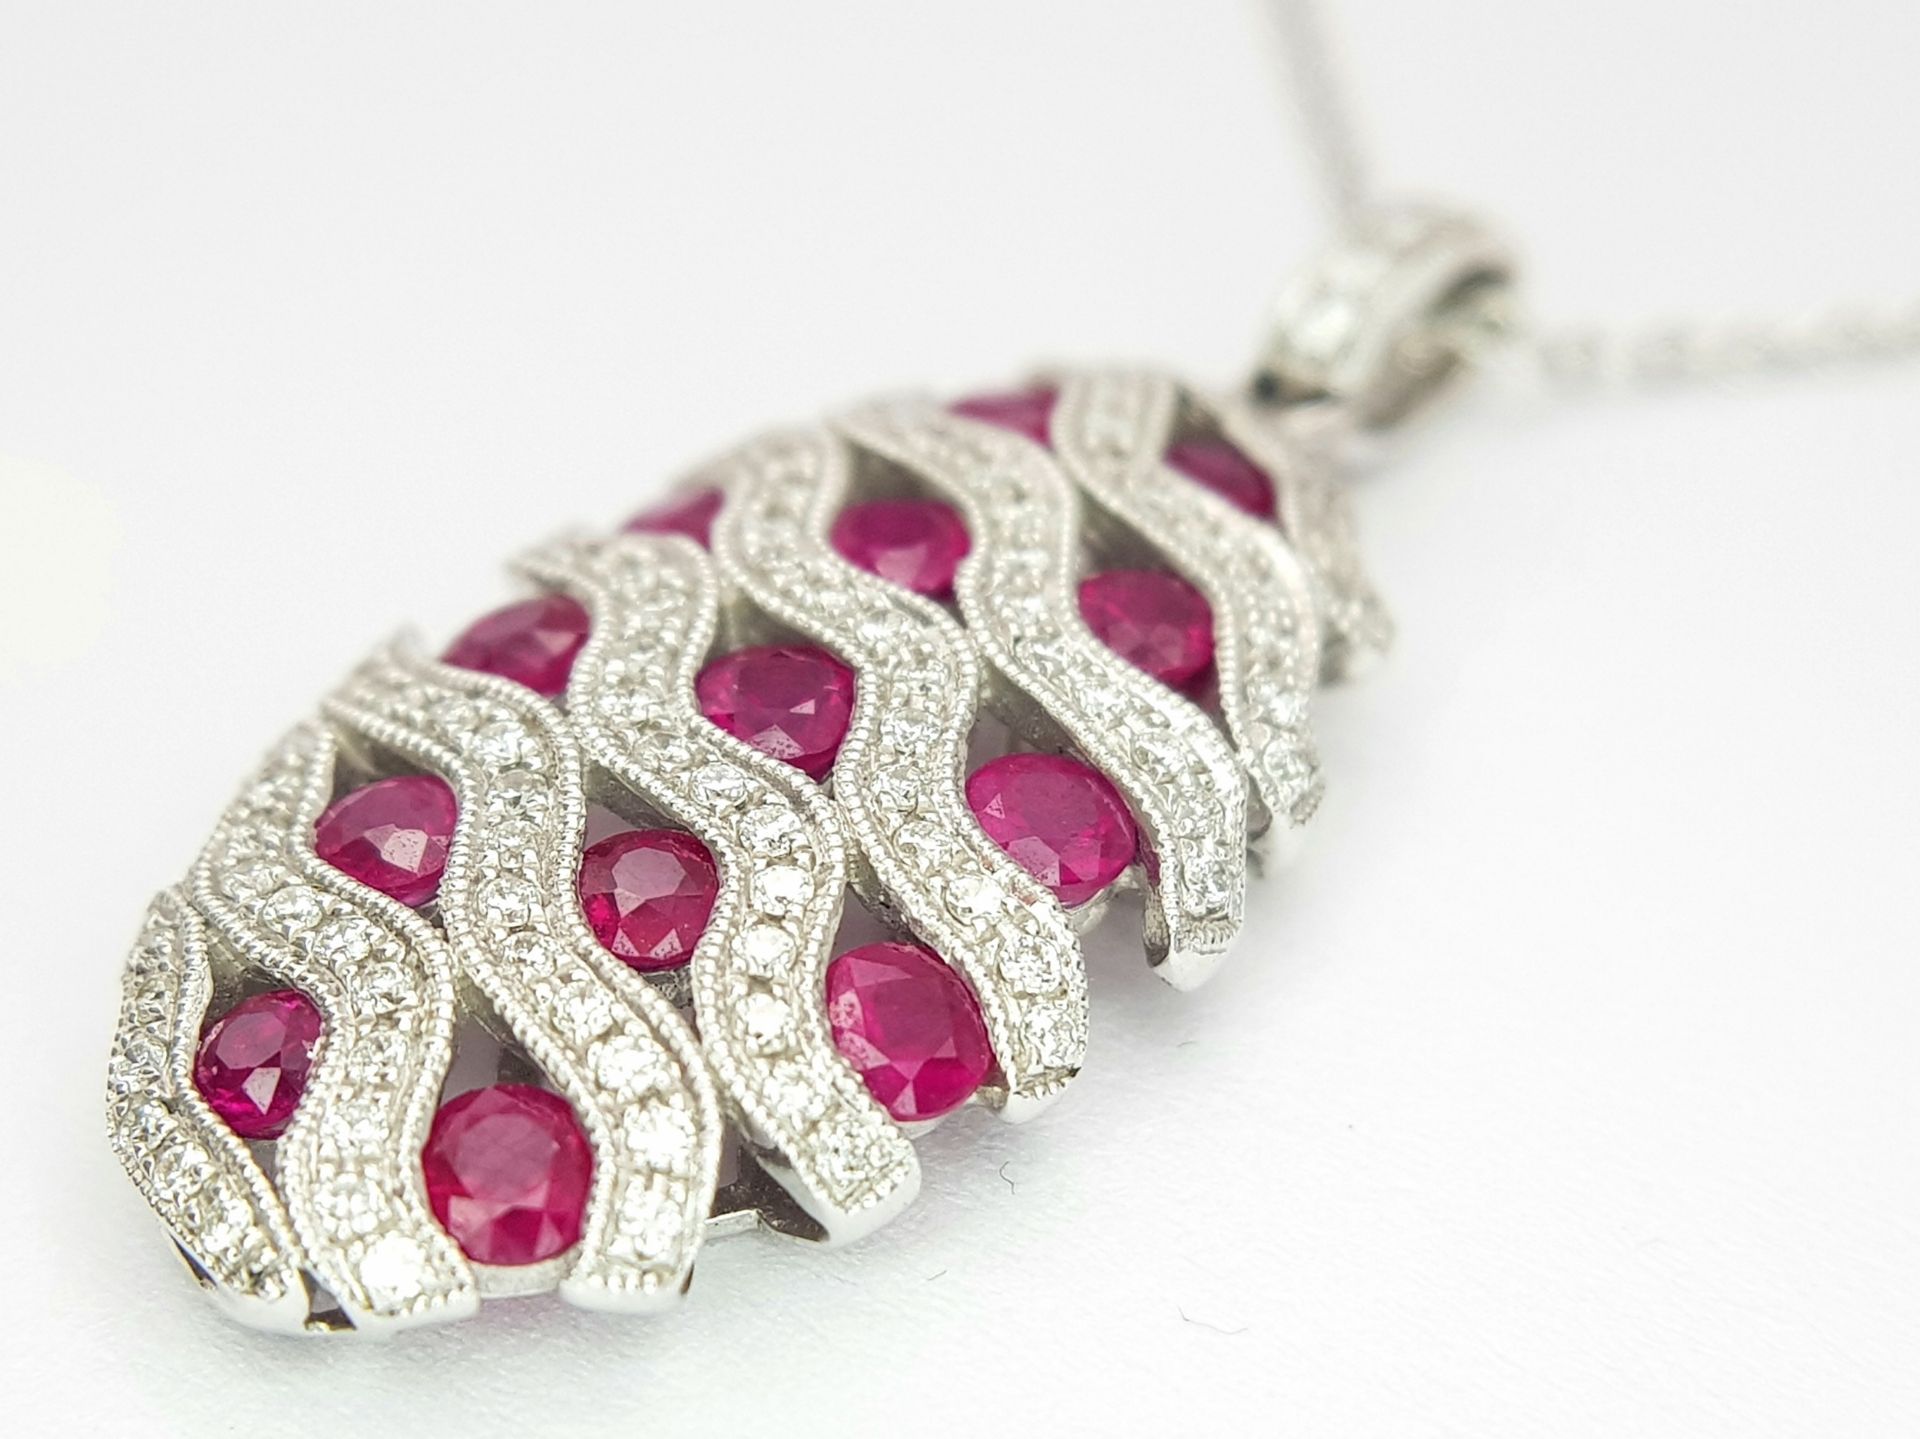 AN 18K WHITE GOLD DIAMOND AND RUBY PENDANT - 0.49CT OF DIAMONDS AND 2.29CT OF RUBIES. 6.2G WEIGHT. - Bild 3 aus 16